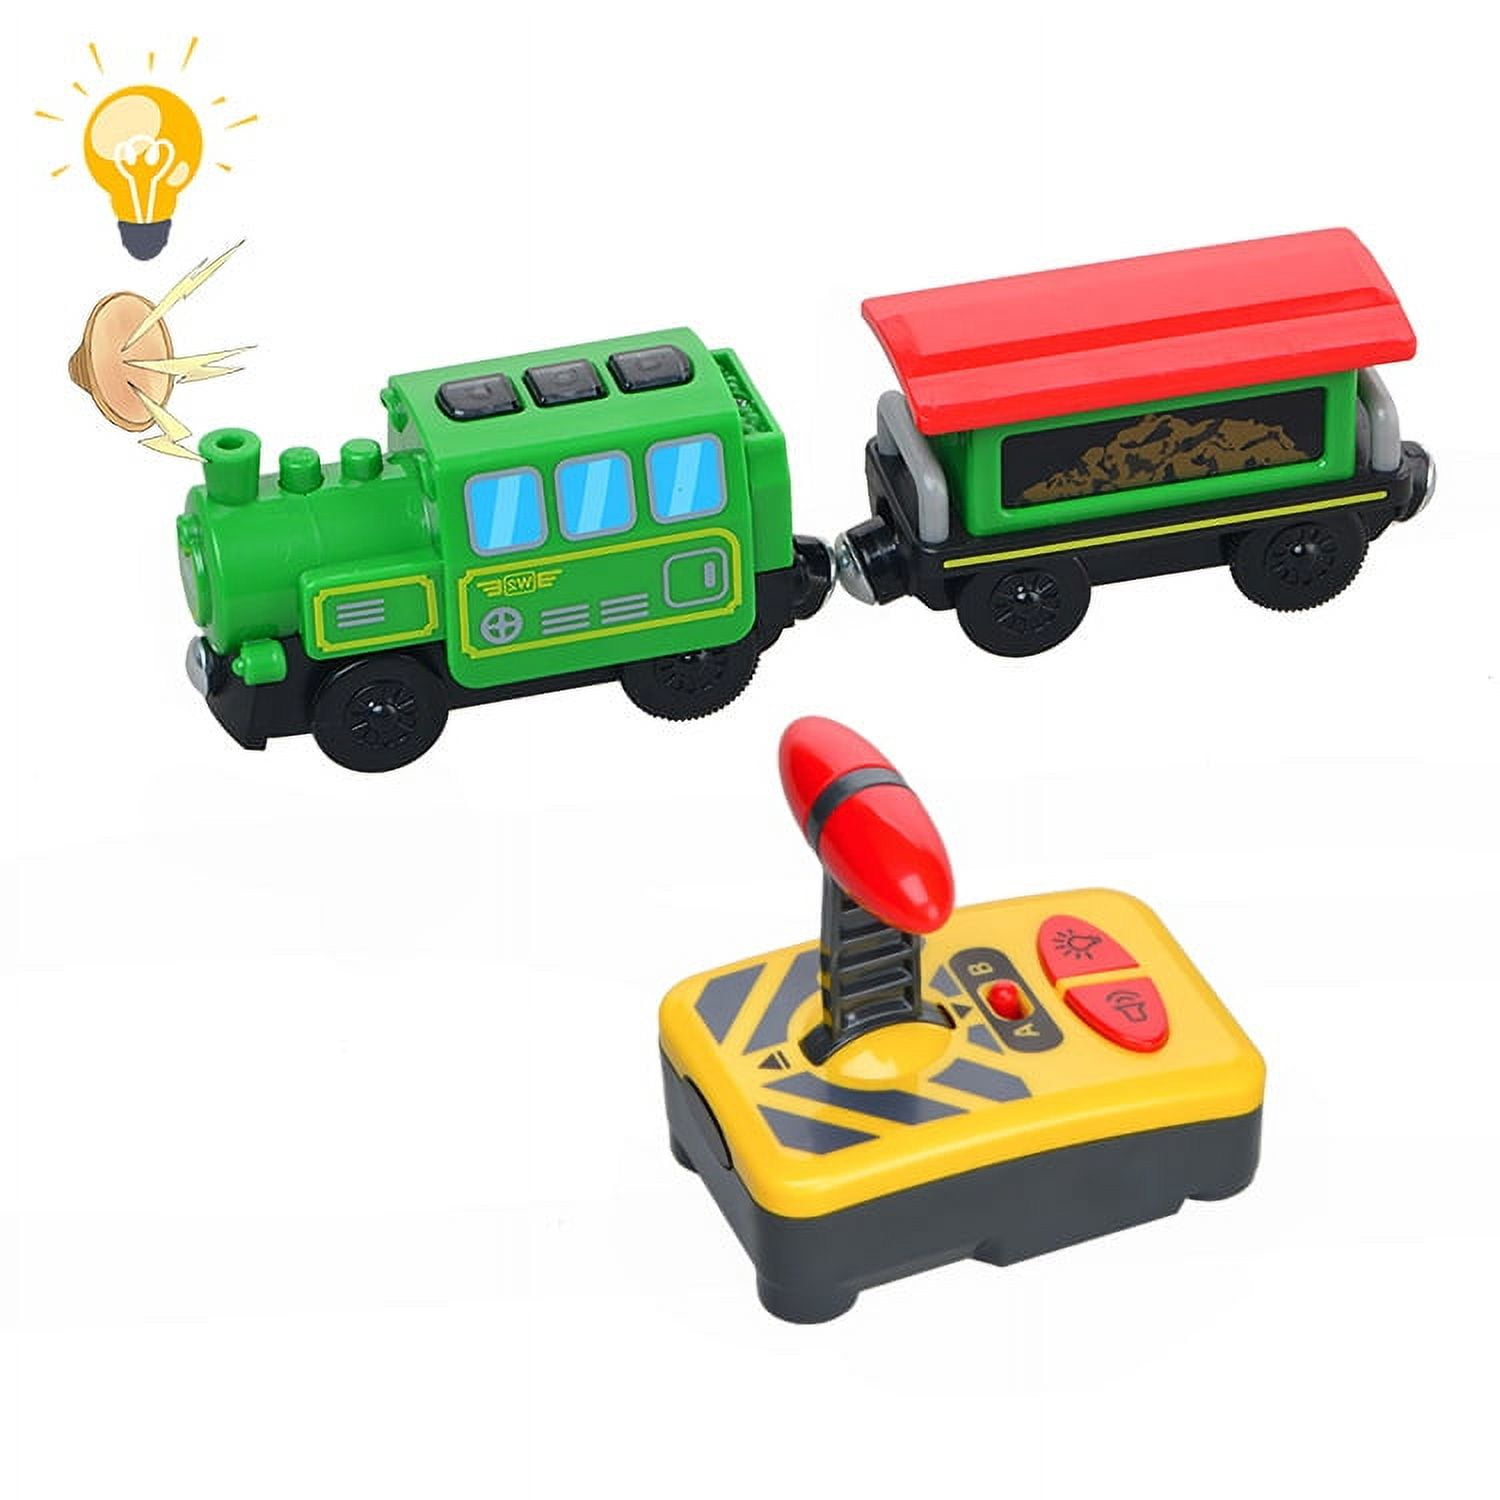 BRIO Railway Trains Set - Full collection of Brio Battery Trains &  Accessories